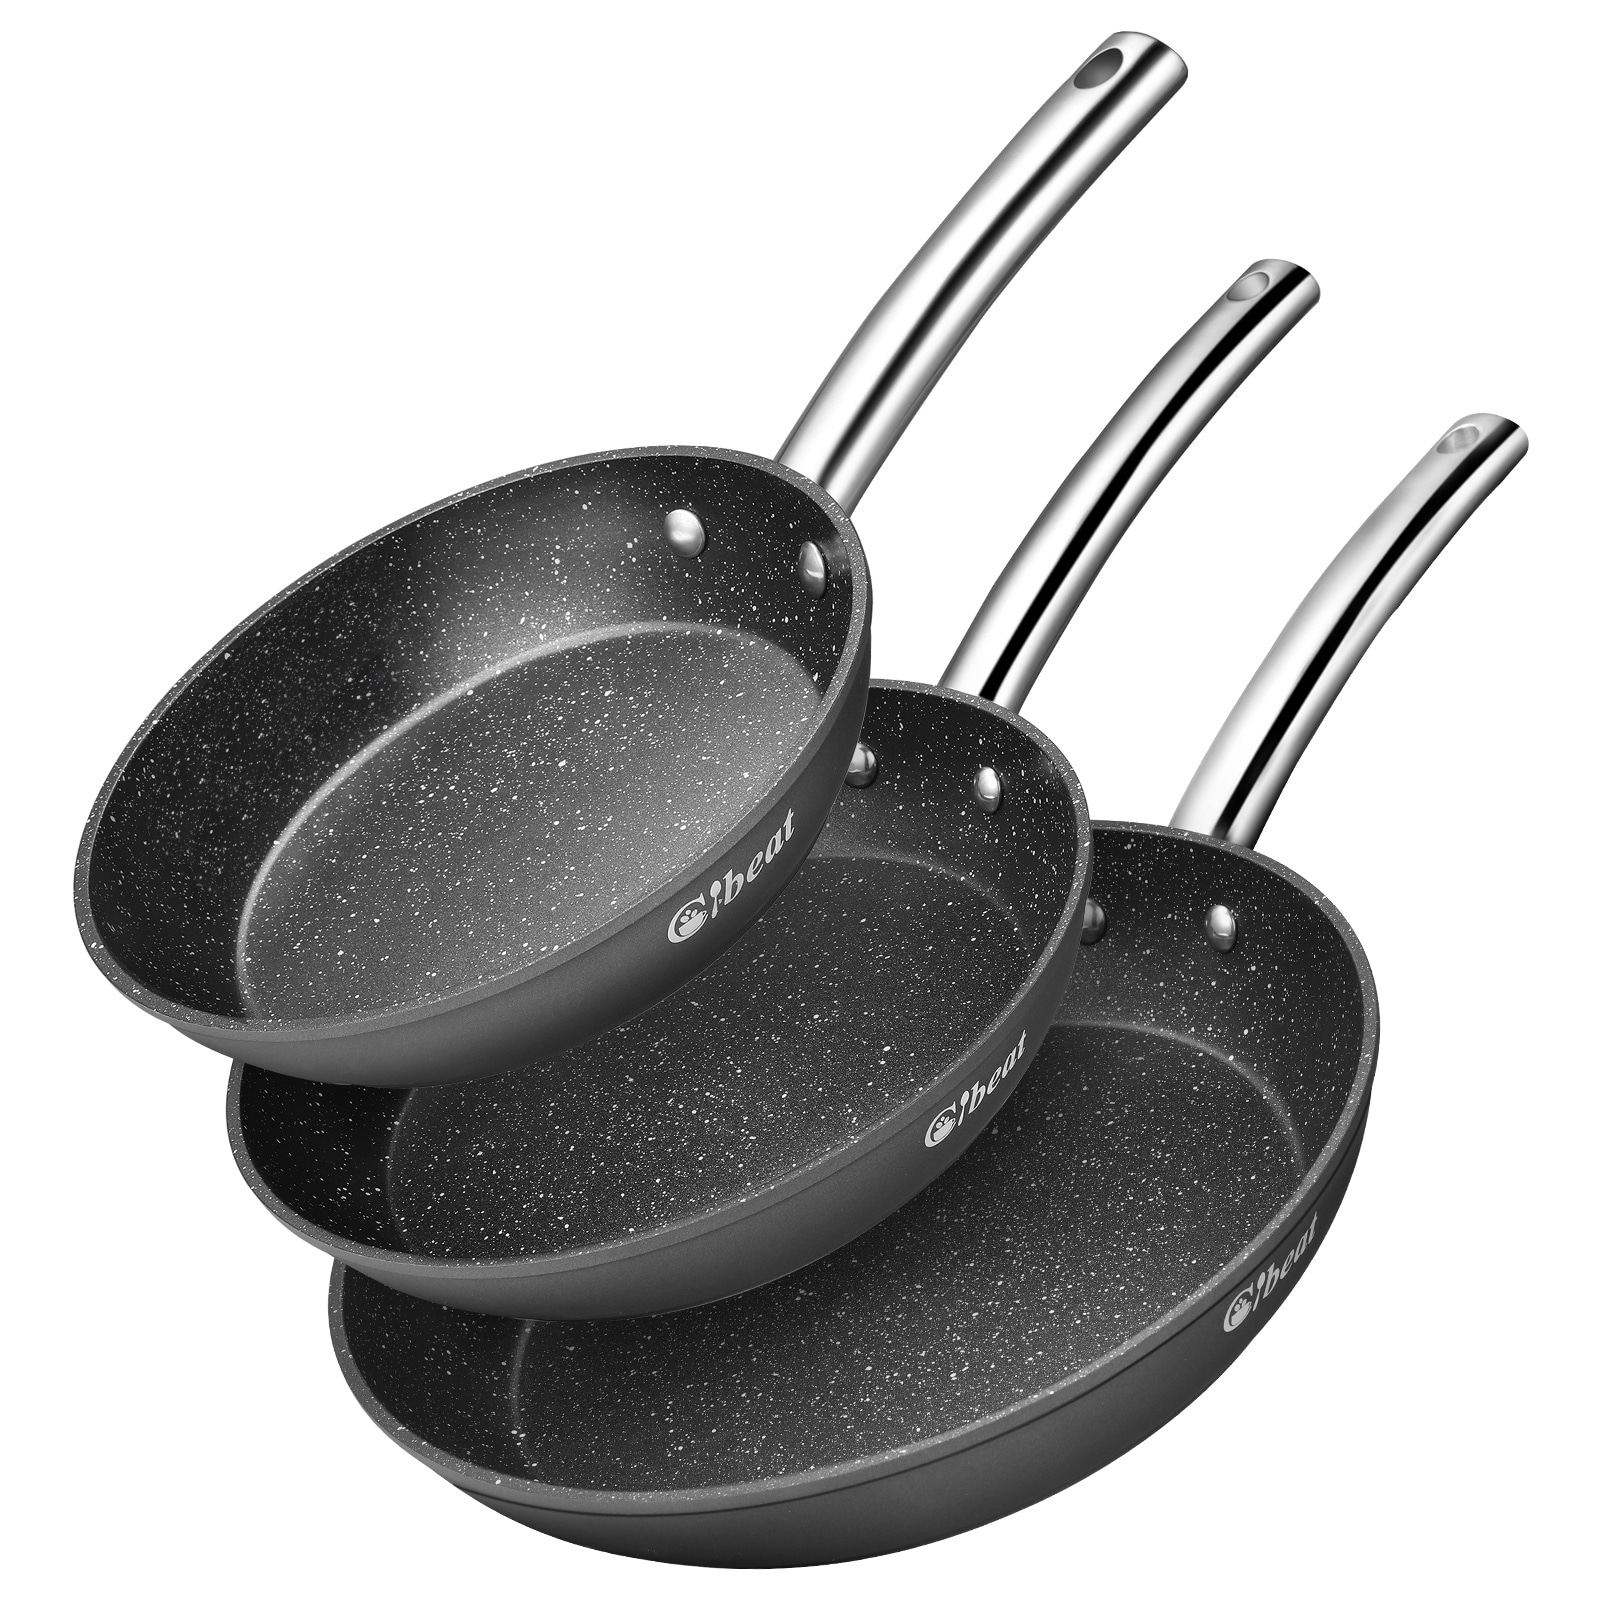 https://ak1.ostkcdn.com/images/products/is/images/direct/fe746658dd0b94a32dc7d4d4f71d2bb00bcb08a8/Nonstick-Frying-Pan-Skillet-Set%2C-High-Quality-Pan-Cookware-Set.jpg